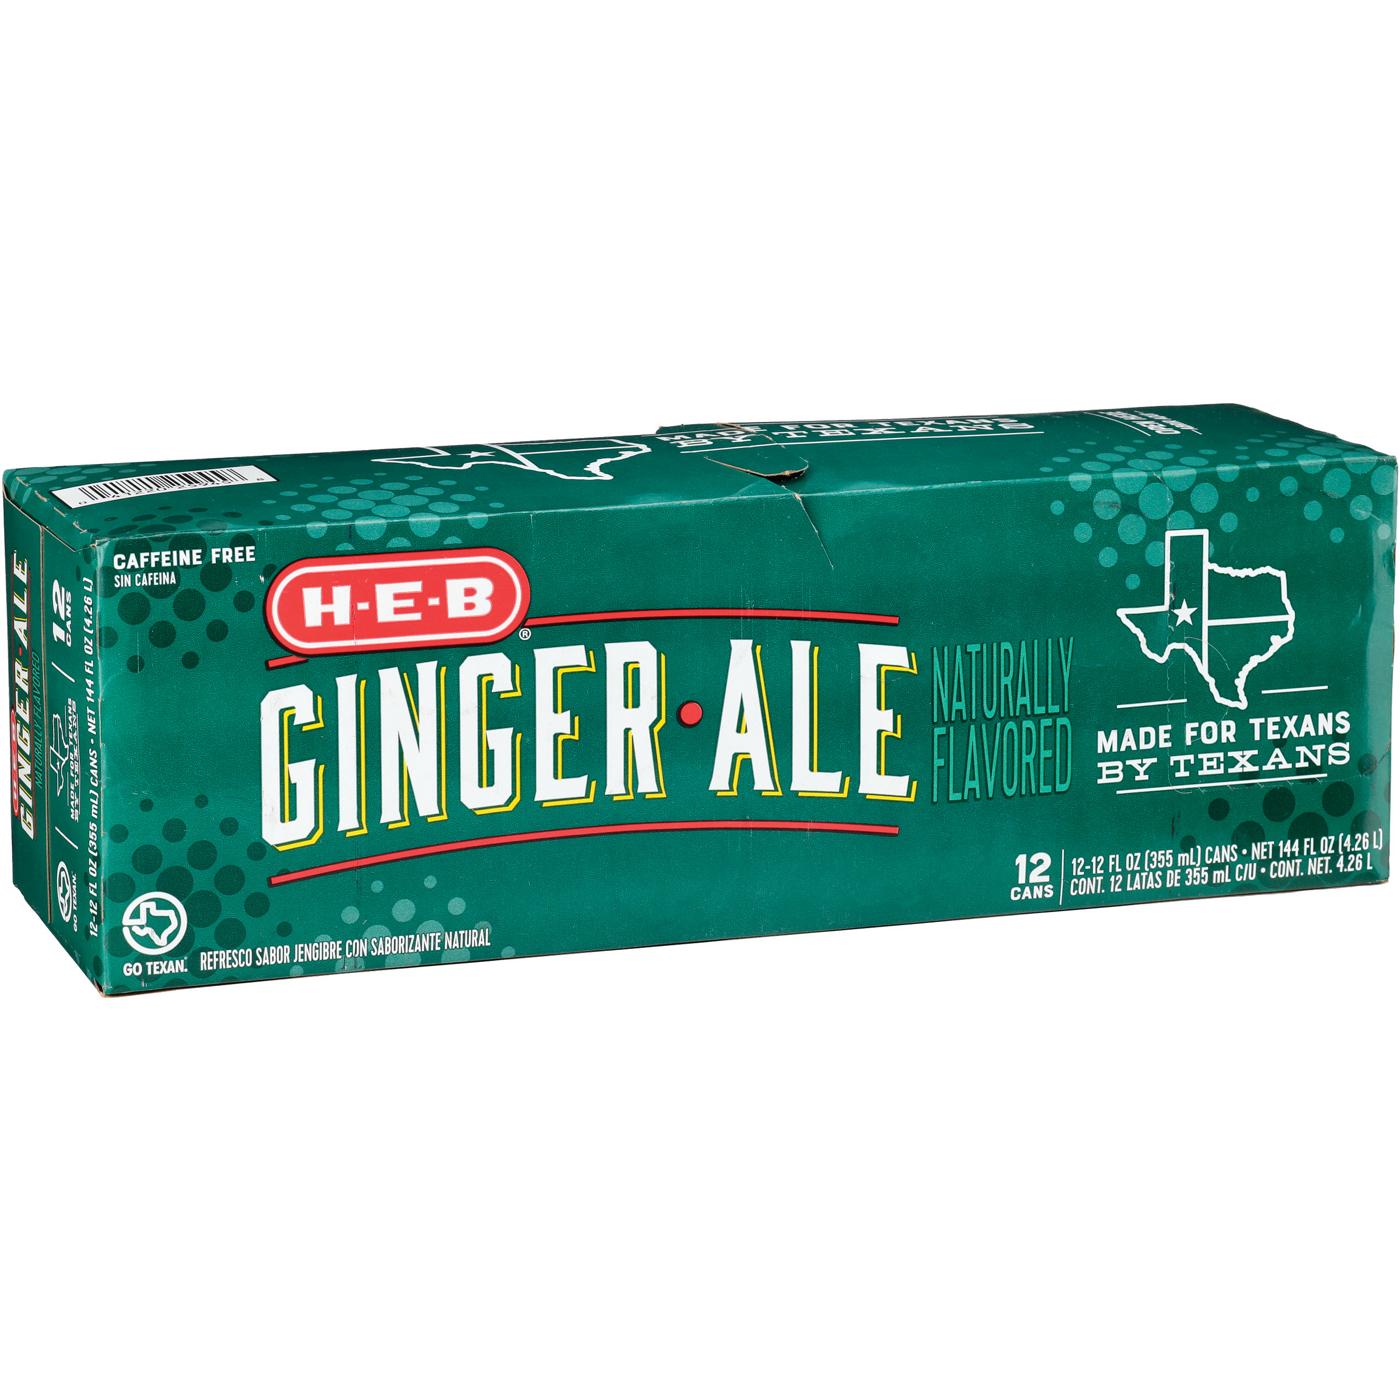 H-E-B Ginger Ale Soda 12 pk Cans; image 2 of 2